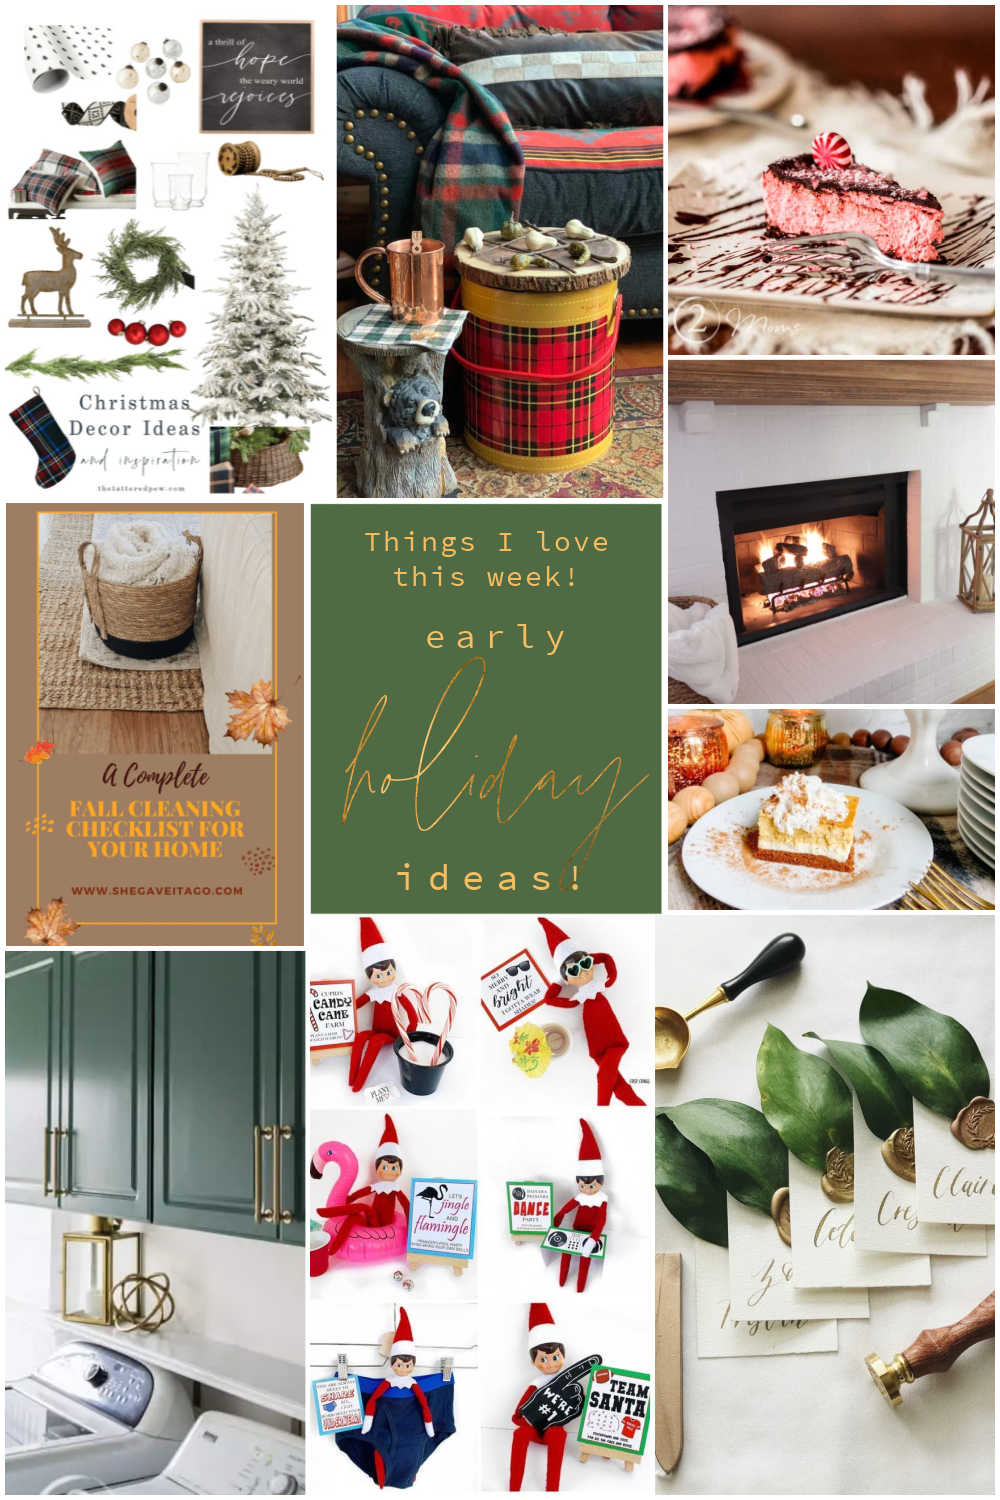 Welcome Home Saturday -- Early Holiday Ideas! Thanksgiving and Christmas are coming! Here are some easy ways to prepare and make the holidays the best yet! 